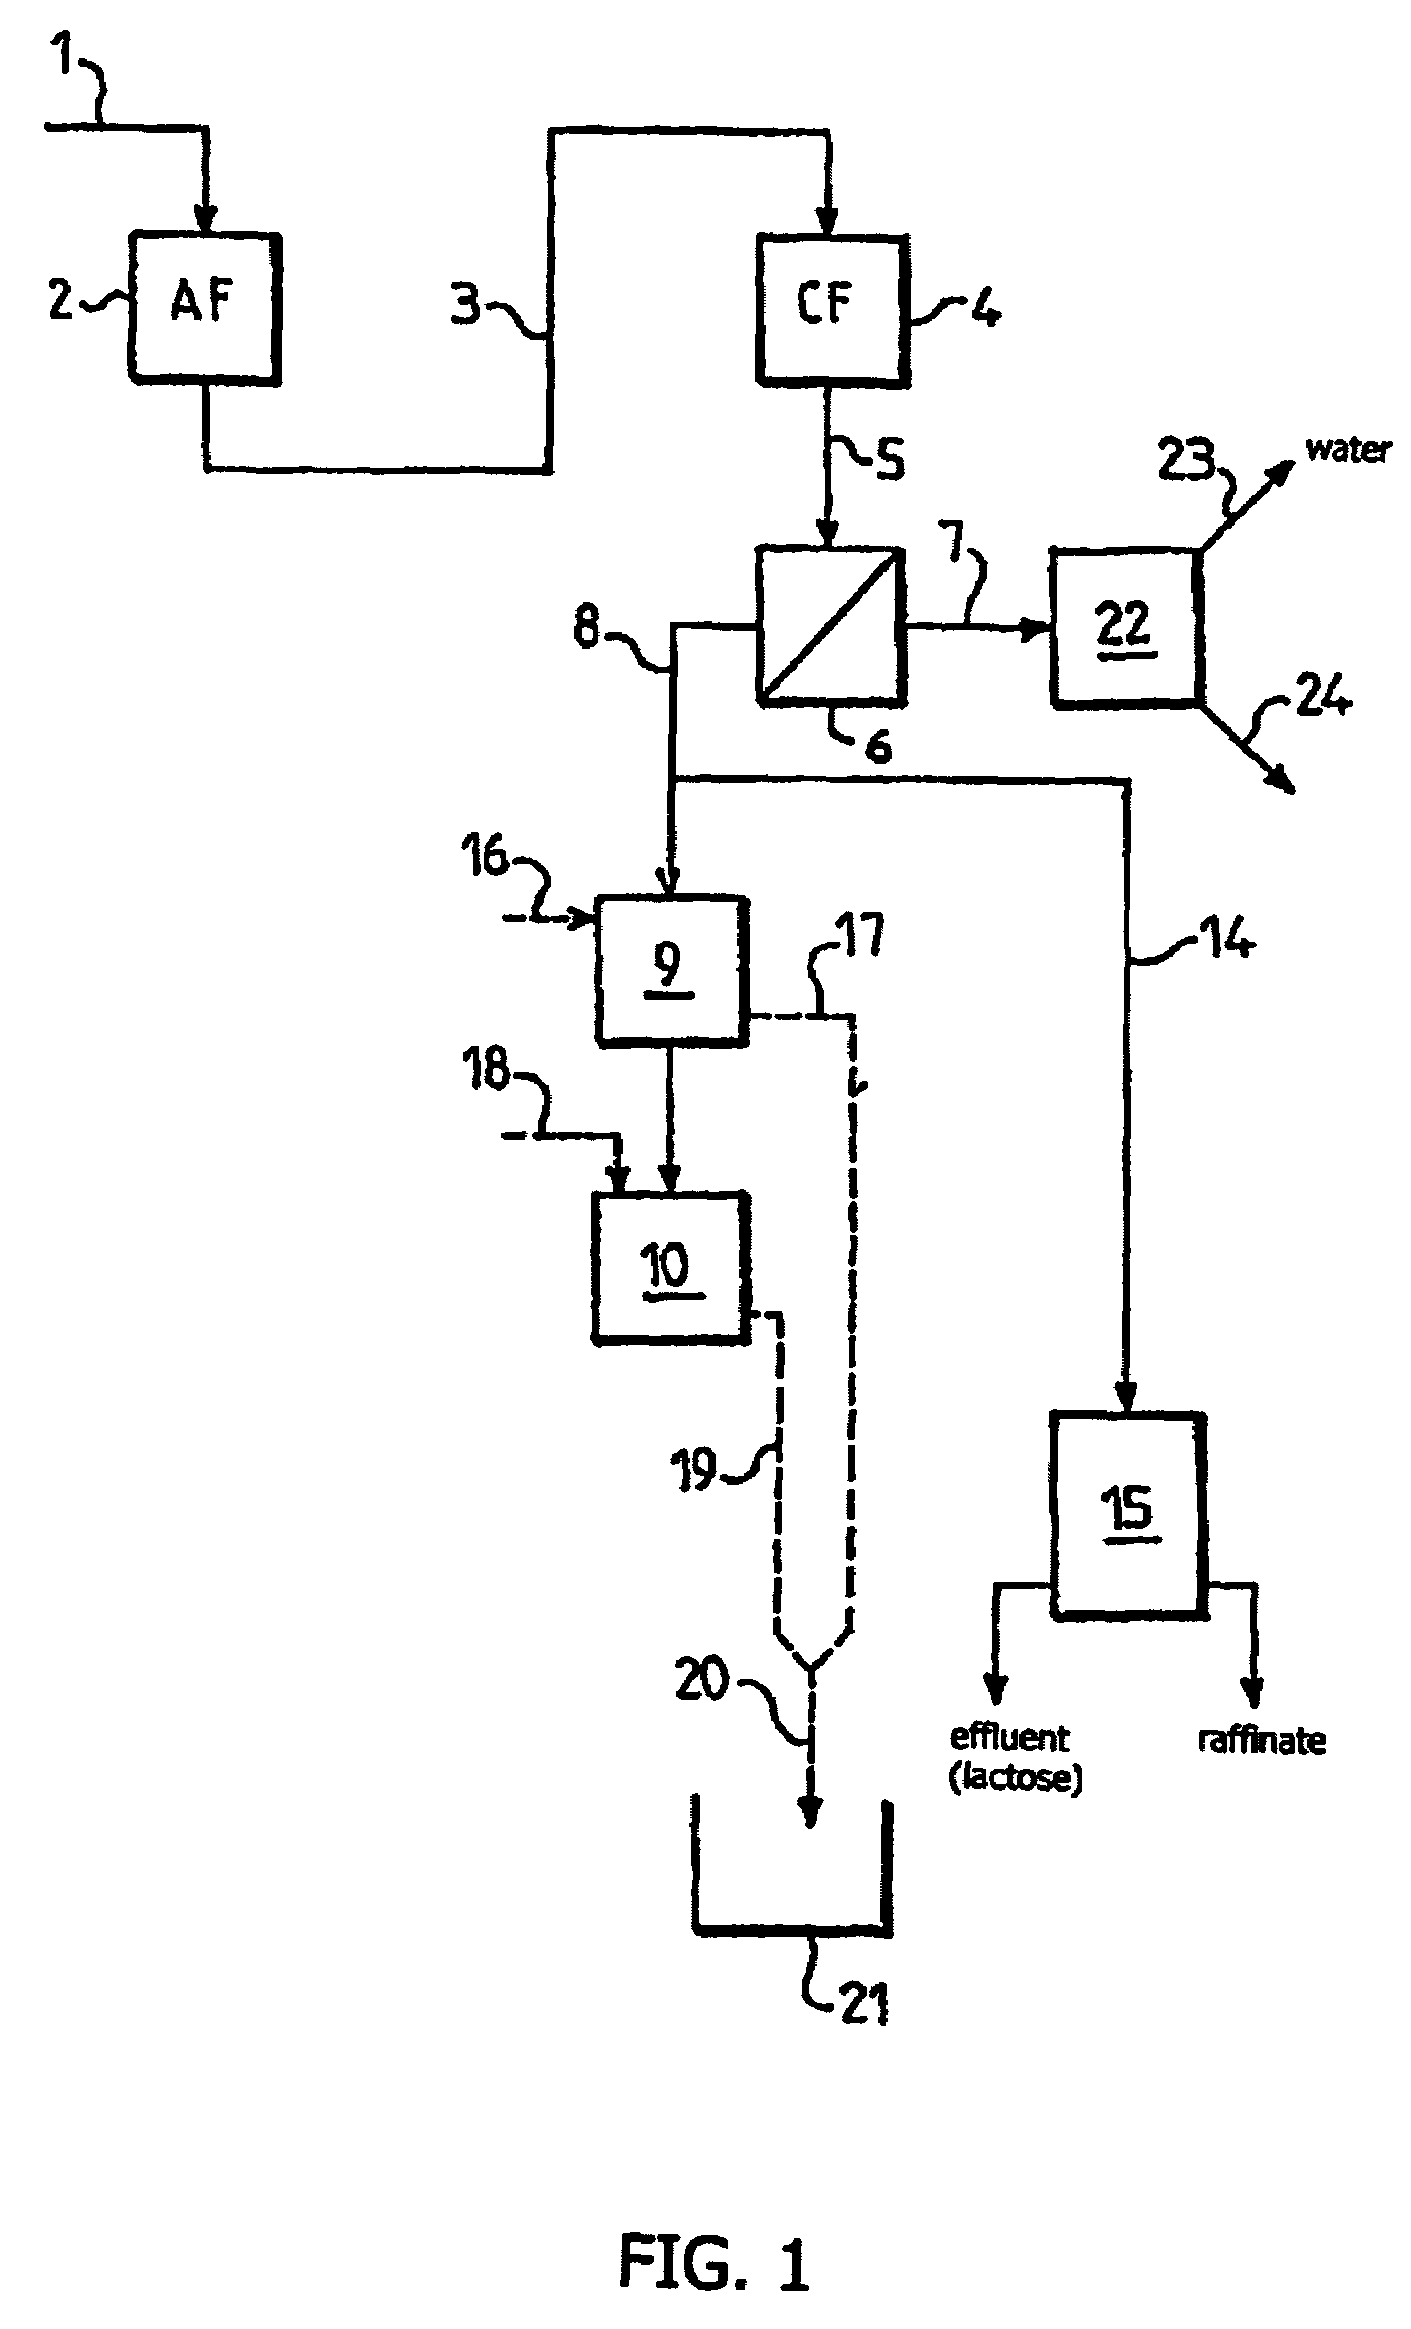 Method for purifying by nanofiltration an aqueous sugary solution containing monovalent and polyvalent anions and cations